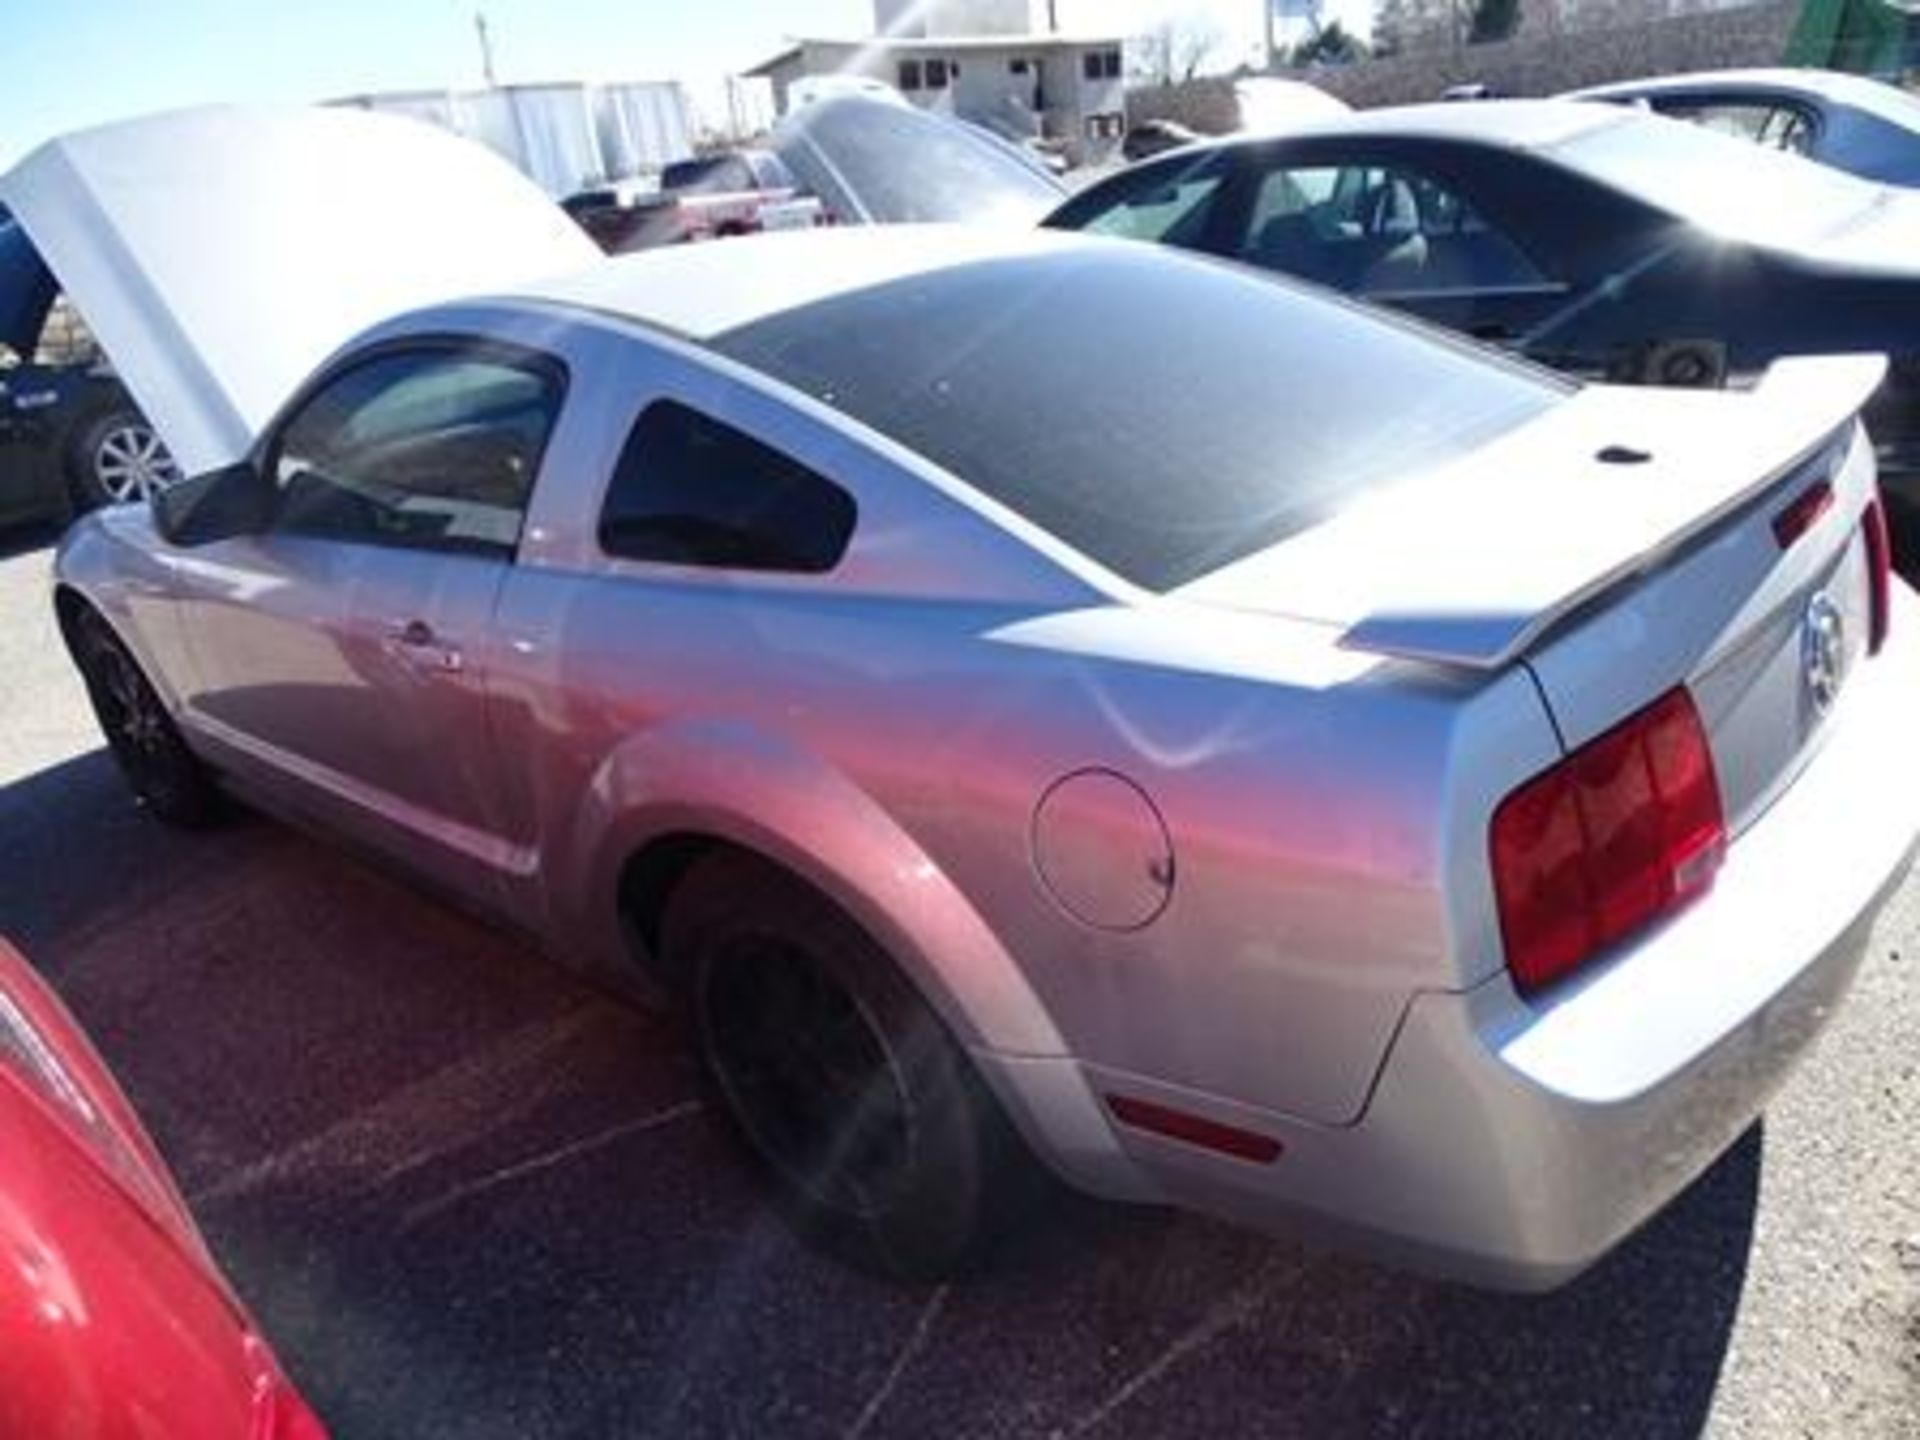 Vehículo Marca Ford Mustang, Tipo Sedan, Modelo 2007, Located In: Chihuahua, Deposit Of: $5000 - Image 7 of 17